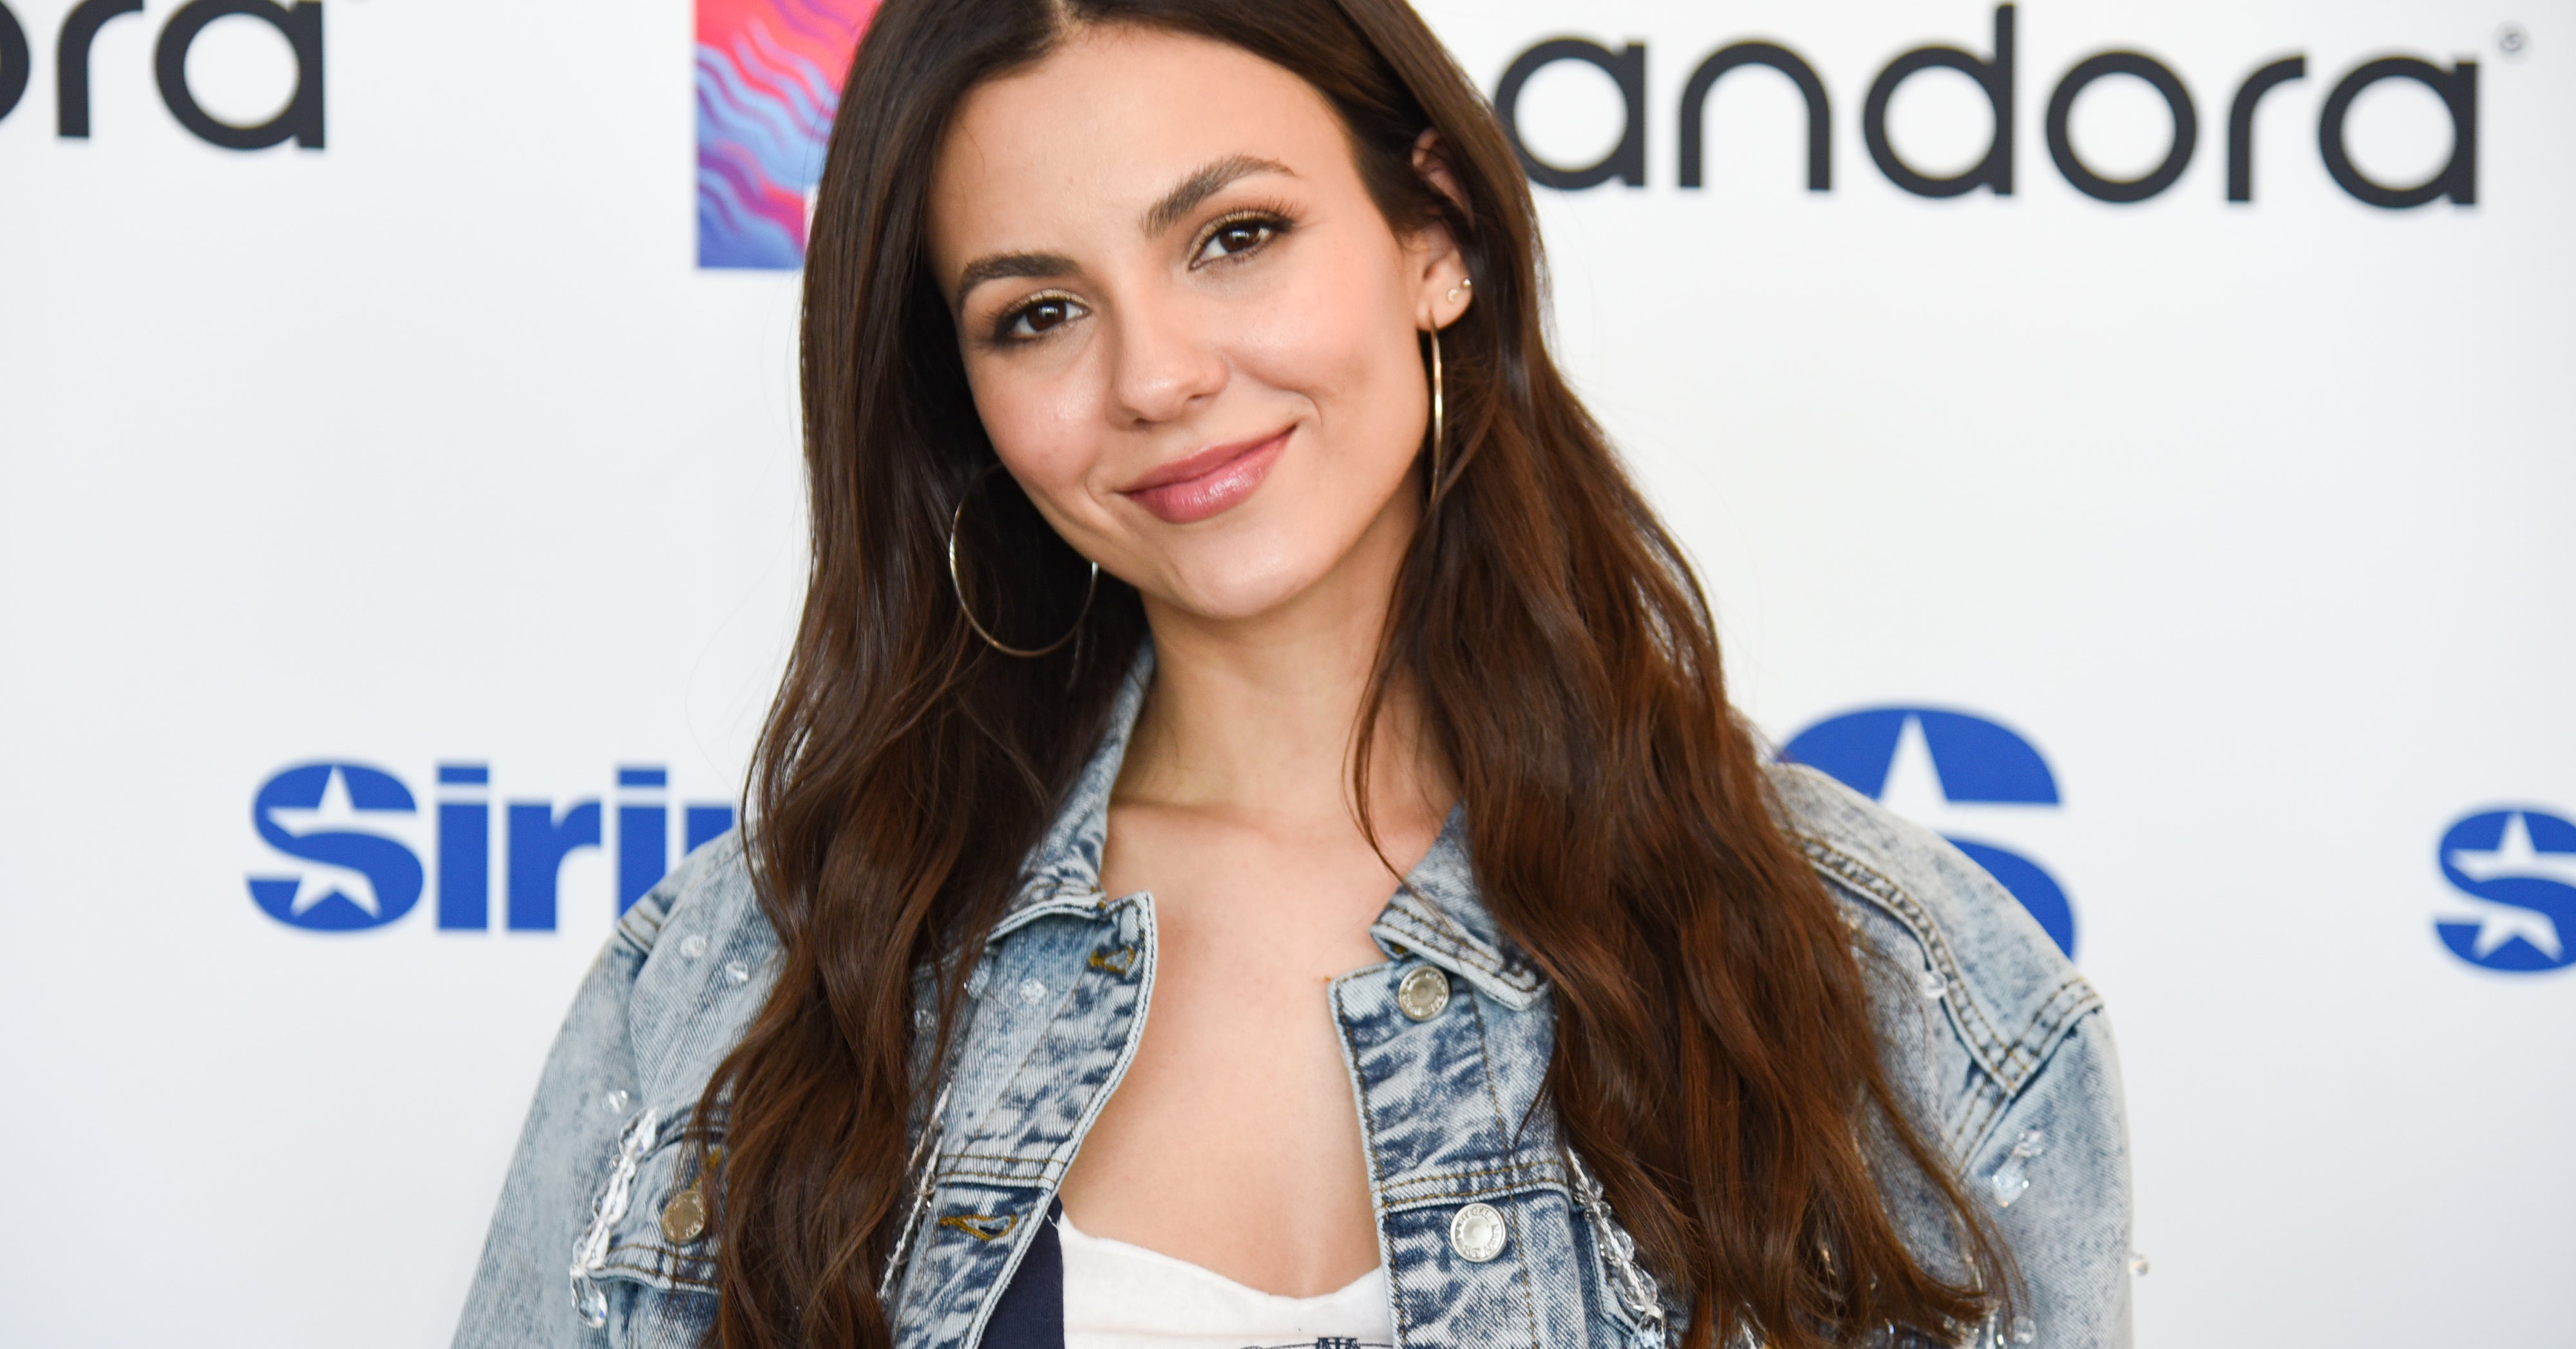 Victoria Justice Explained Why Filming Her First Sex Scene Was "Uncomfortable"